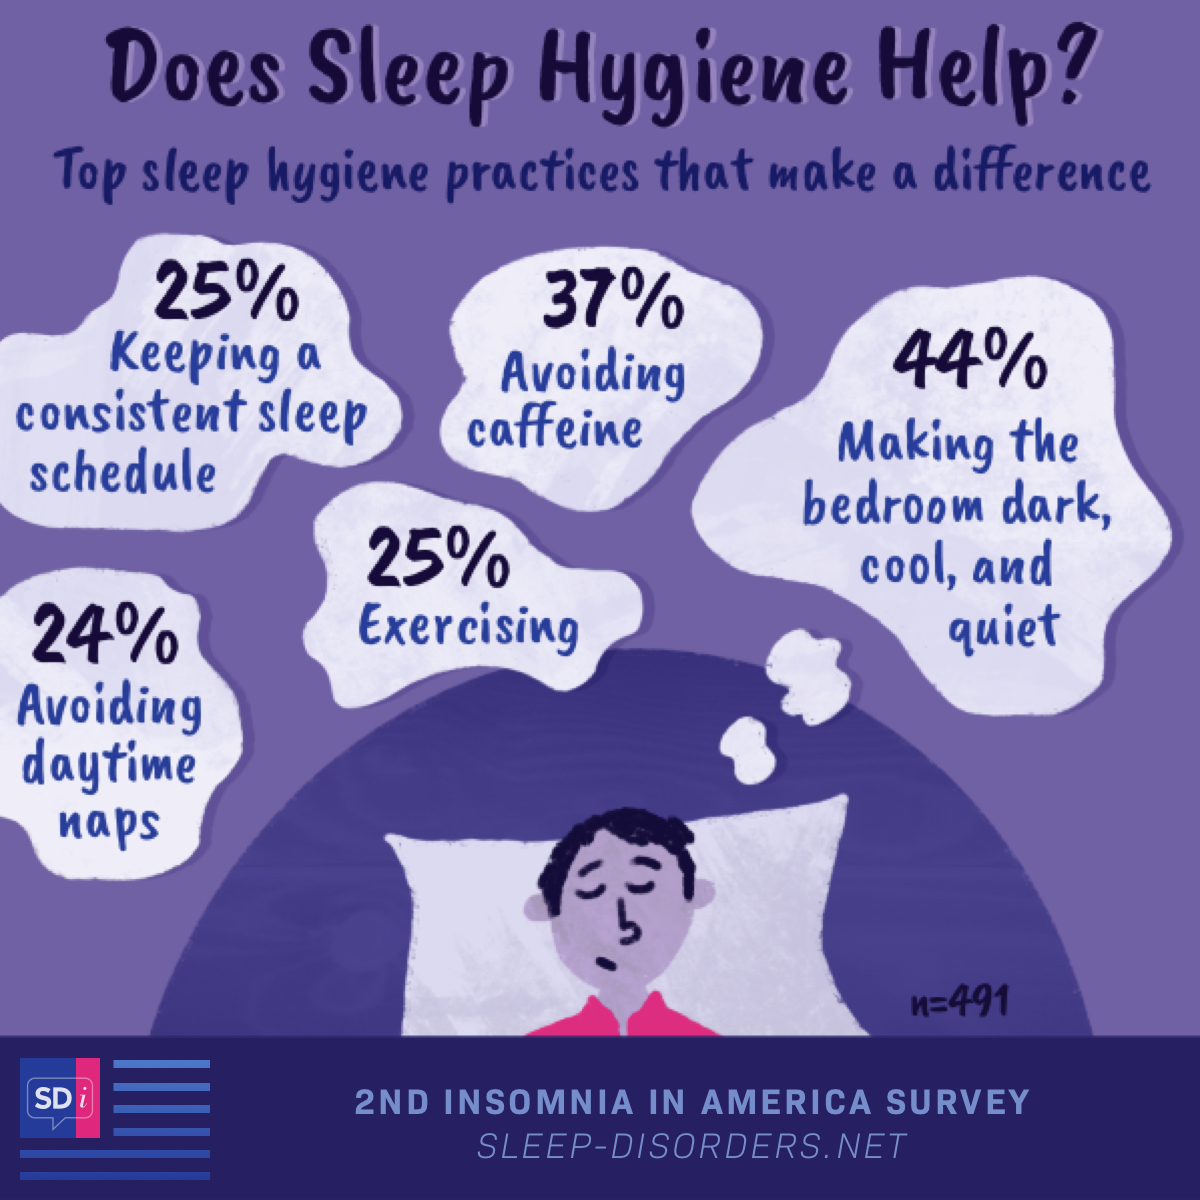 According to the 2nd Sleep Disorders In America survey, some sleep hygiene practices make more of a difference for people living with insomnia.